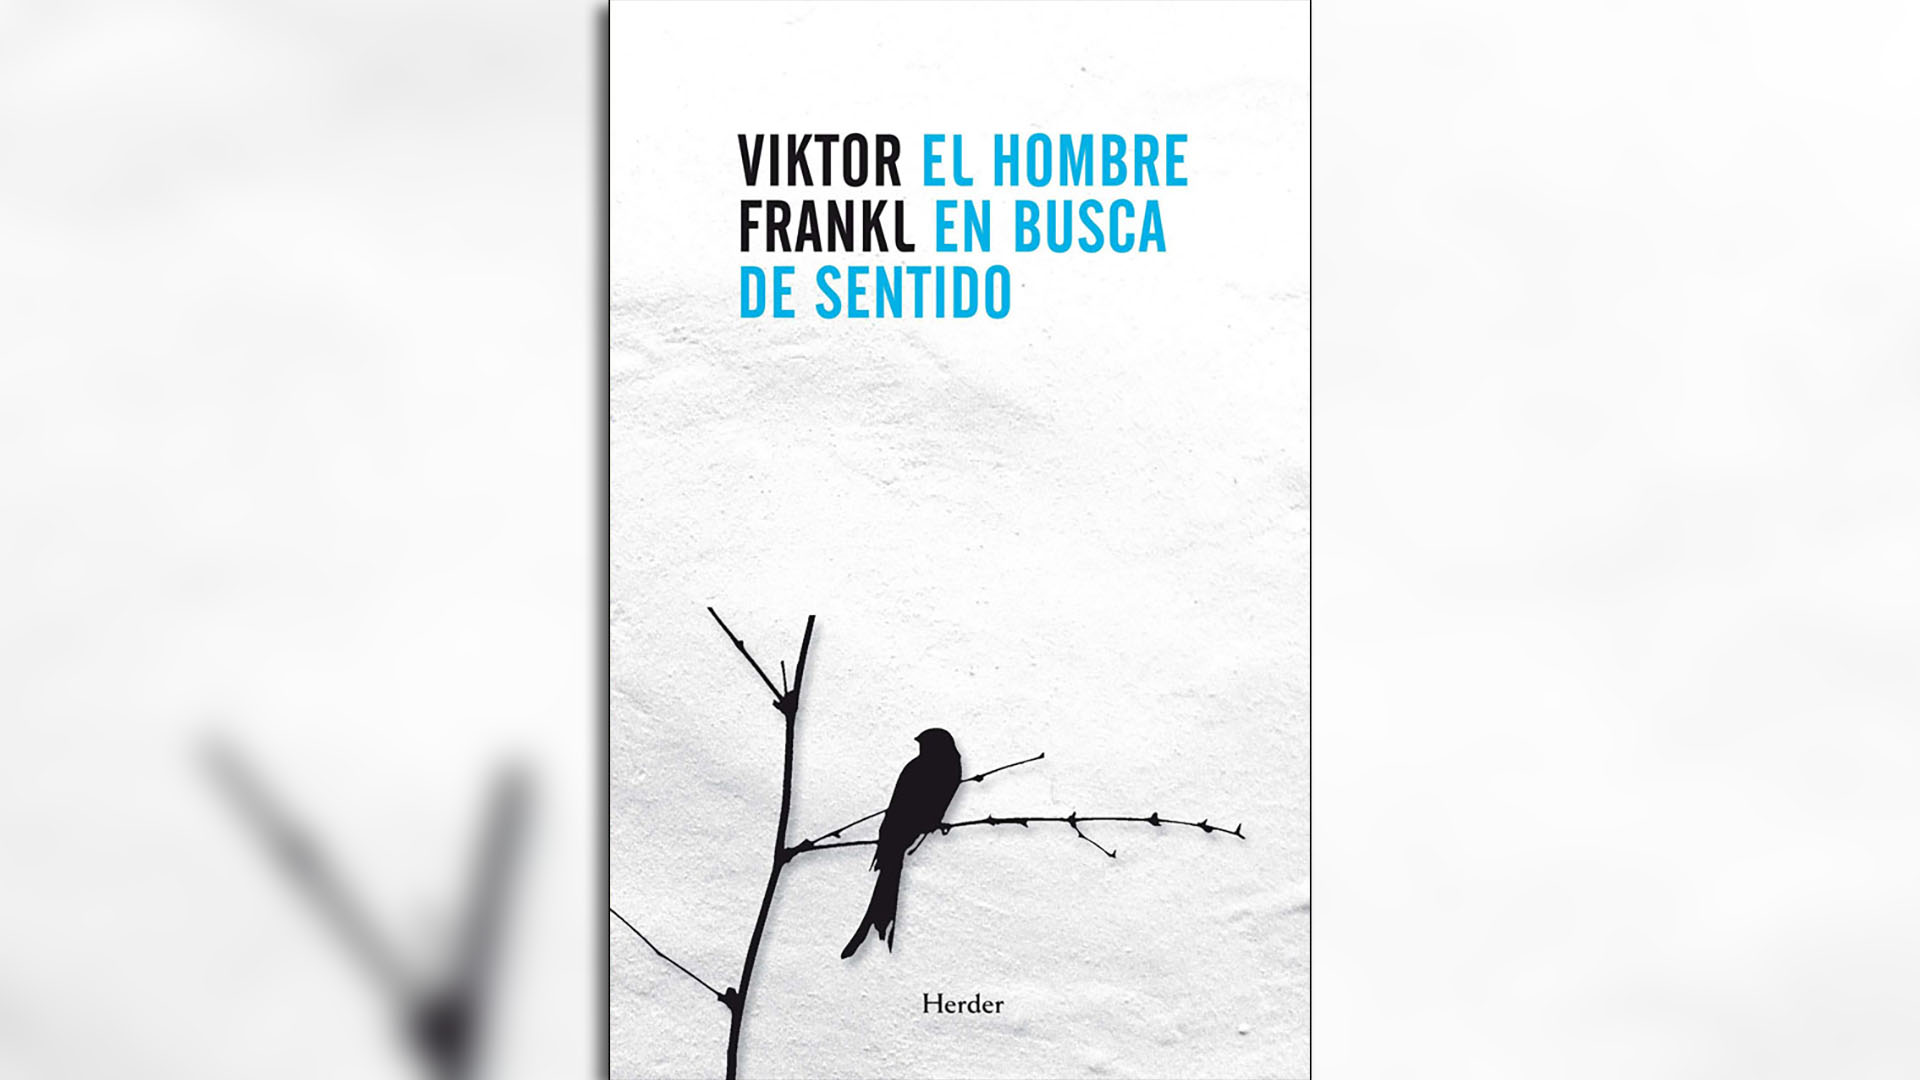 "Man's Search for Meaning"by Víktor Frankl, edited by Herder. 